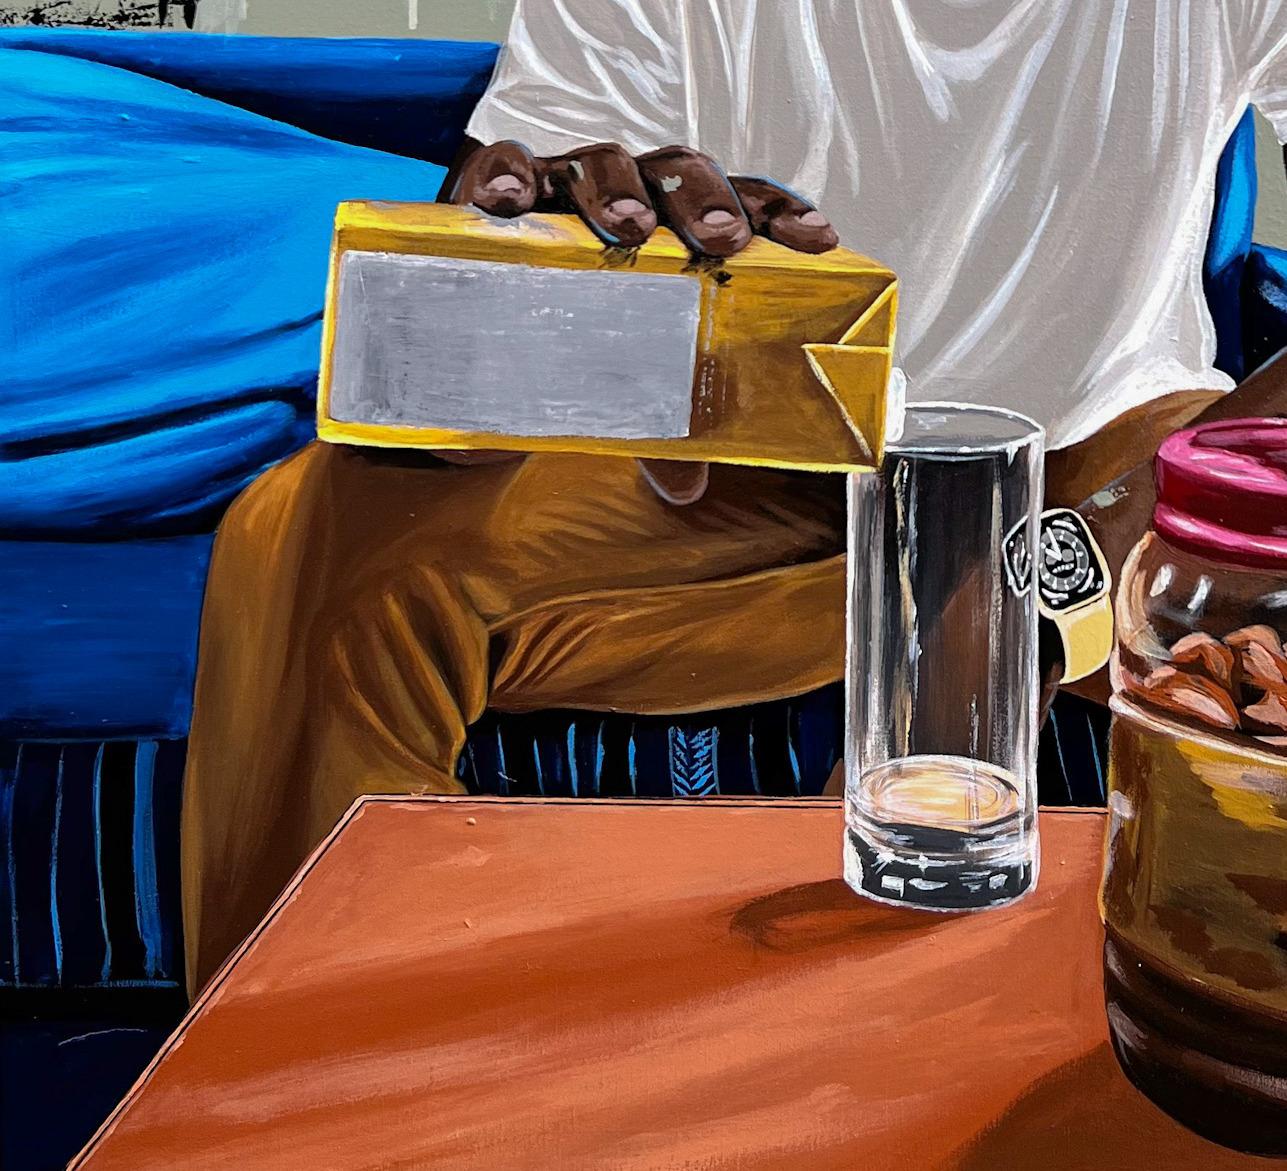 Alagbe's artwork beautifully captures the desire for calmness and relaxation. The act of pouring fruit juice into a glass cup represents the quest for a soothing beverage to calm the nerves and rejuvenate the spirit. The vibrant colors of the fruit